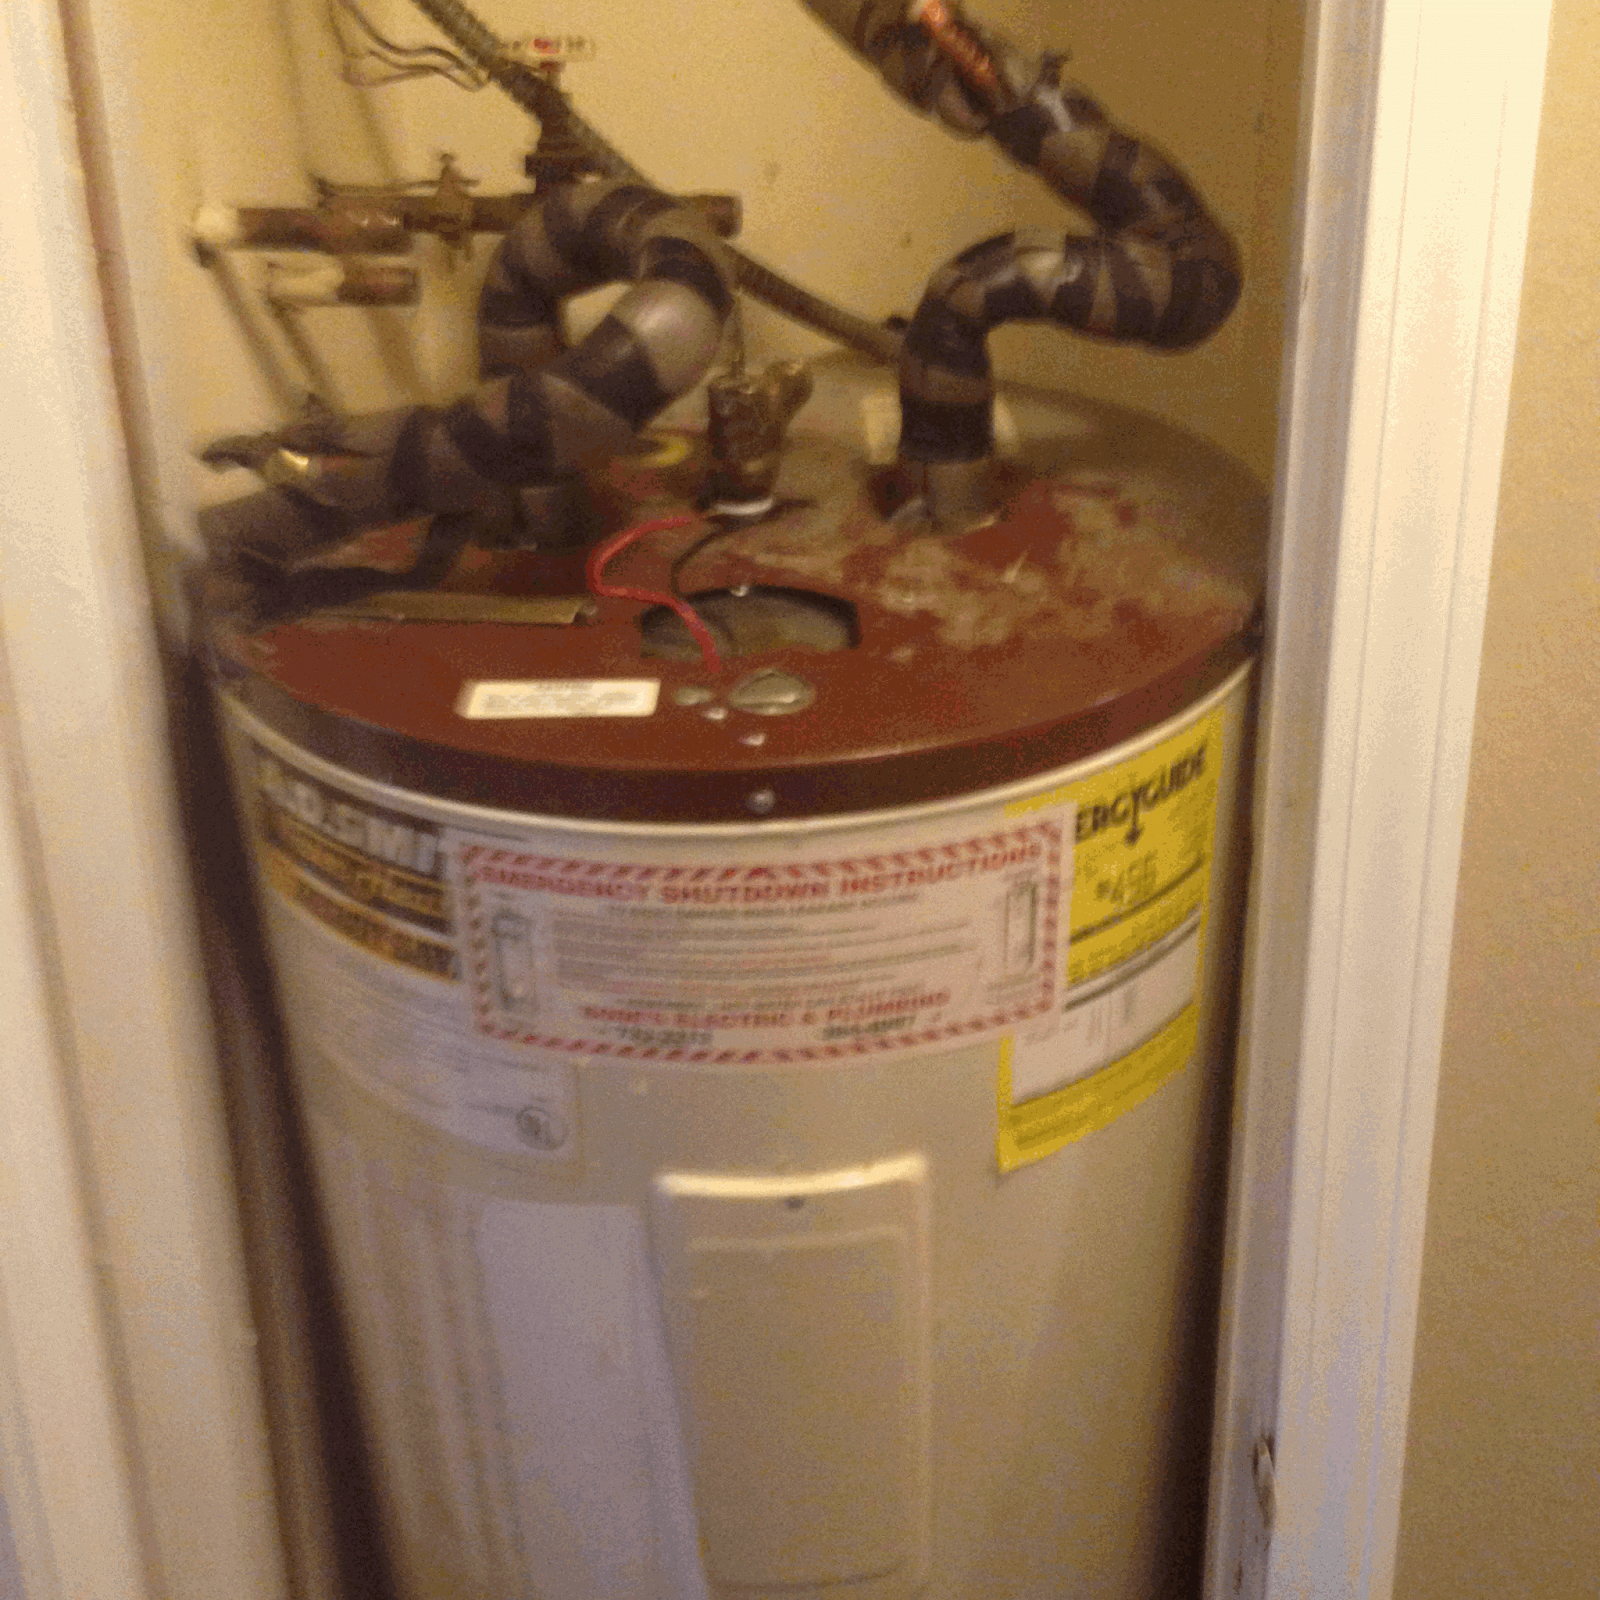 About Barkley Plumbing Water Heater In Tight Space